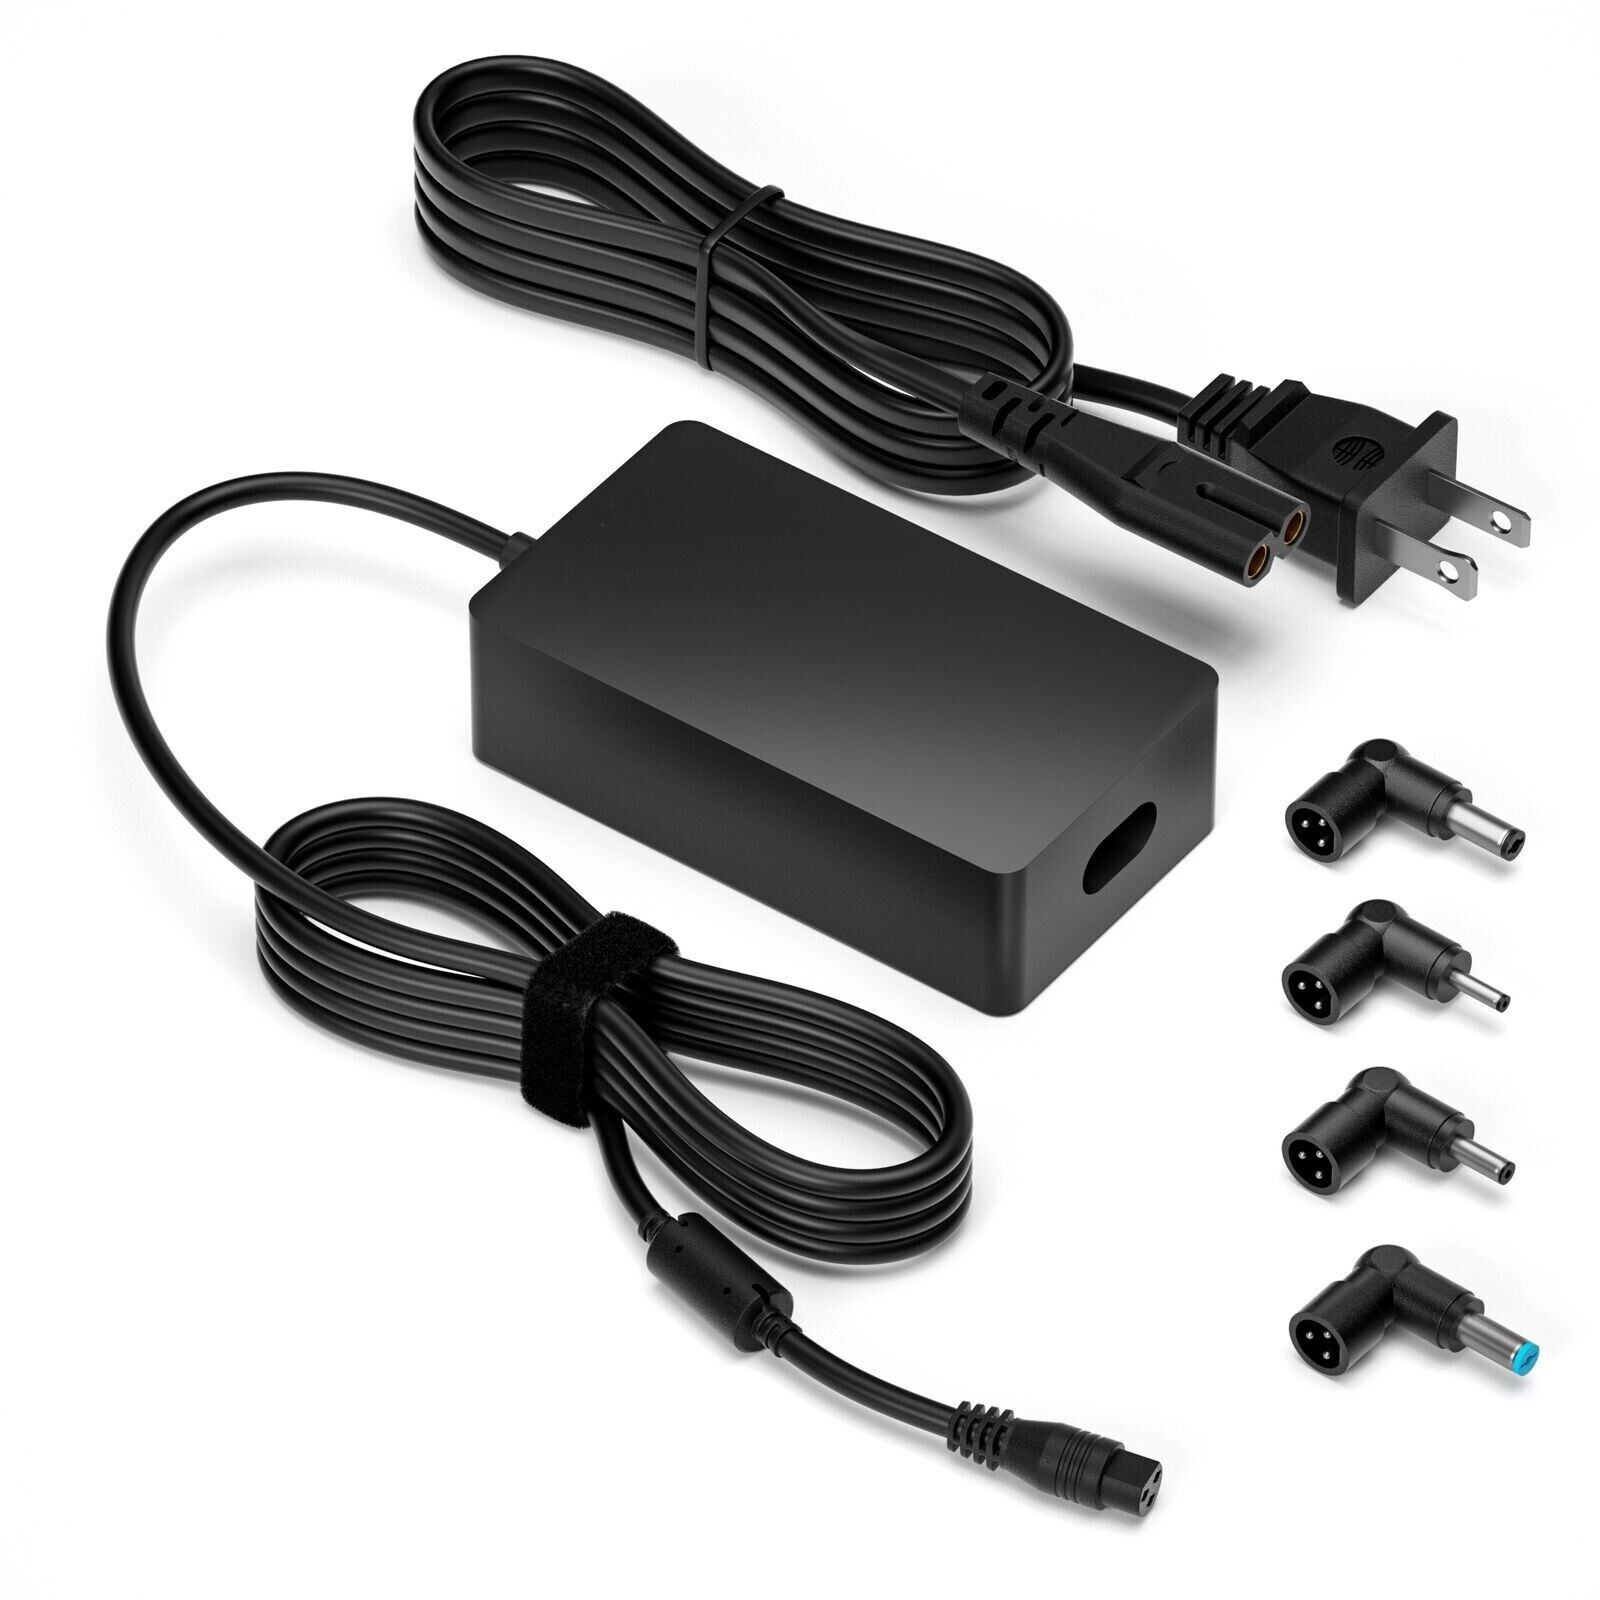 65W 19V 3.42A Laptop Adapter Charger For Asus Acer Samsung Lenovo Power Supply